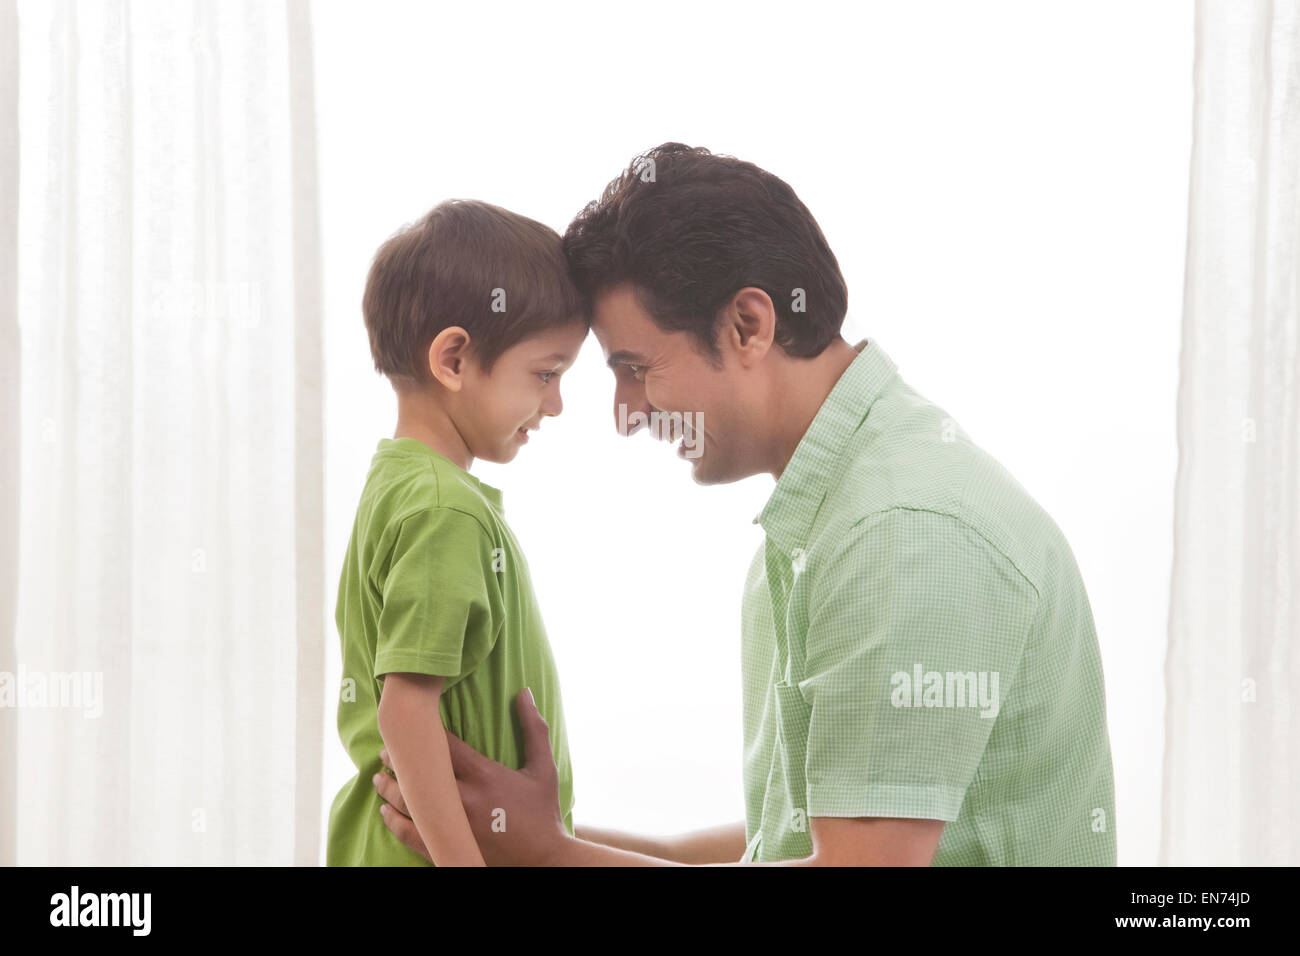 Father and son face to face smiling Stock Photo